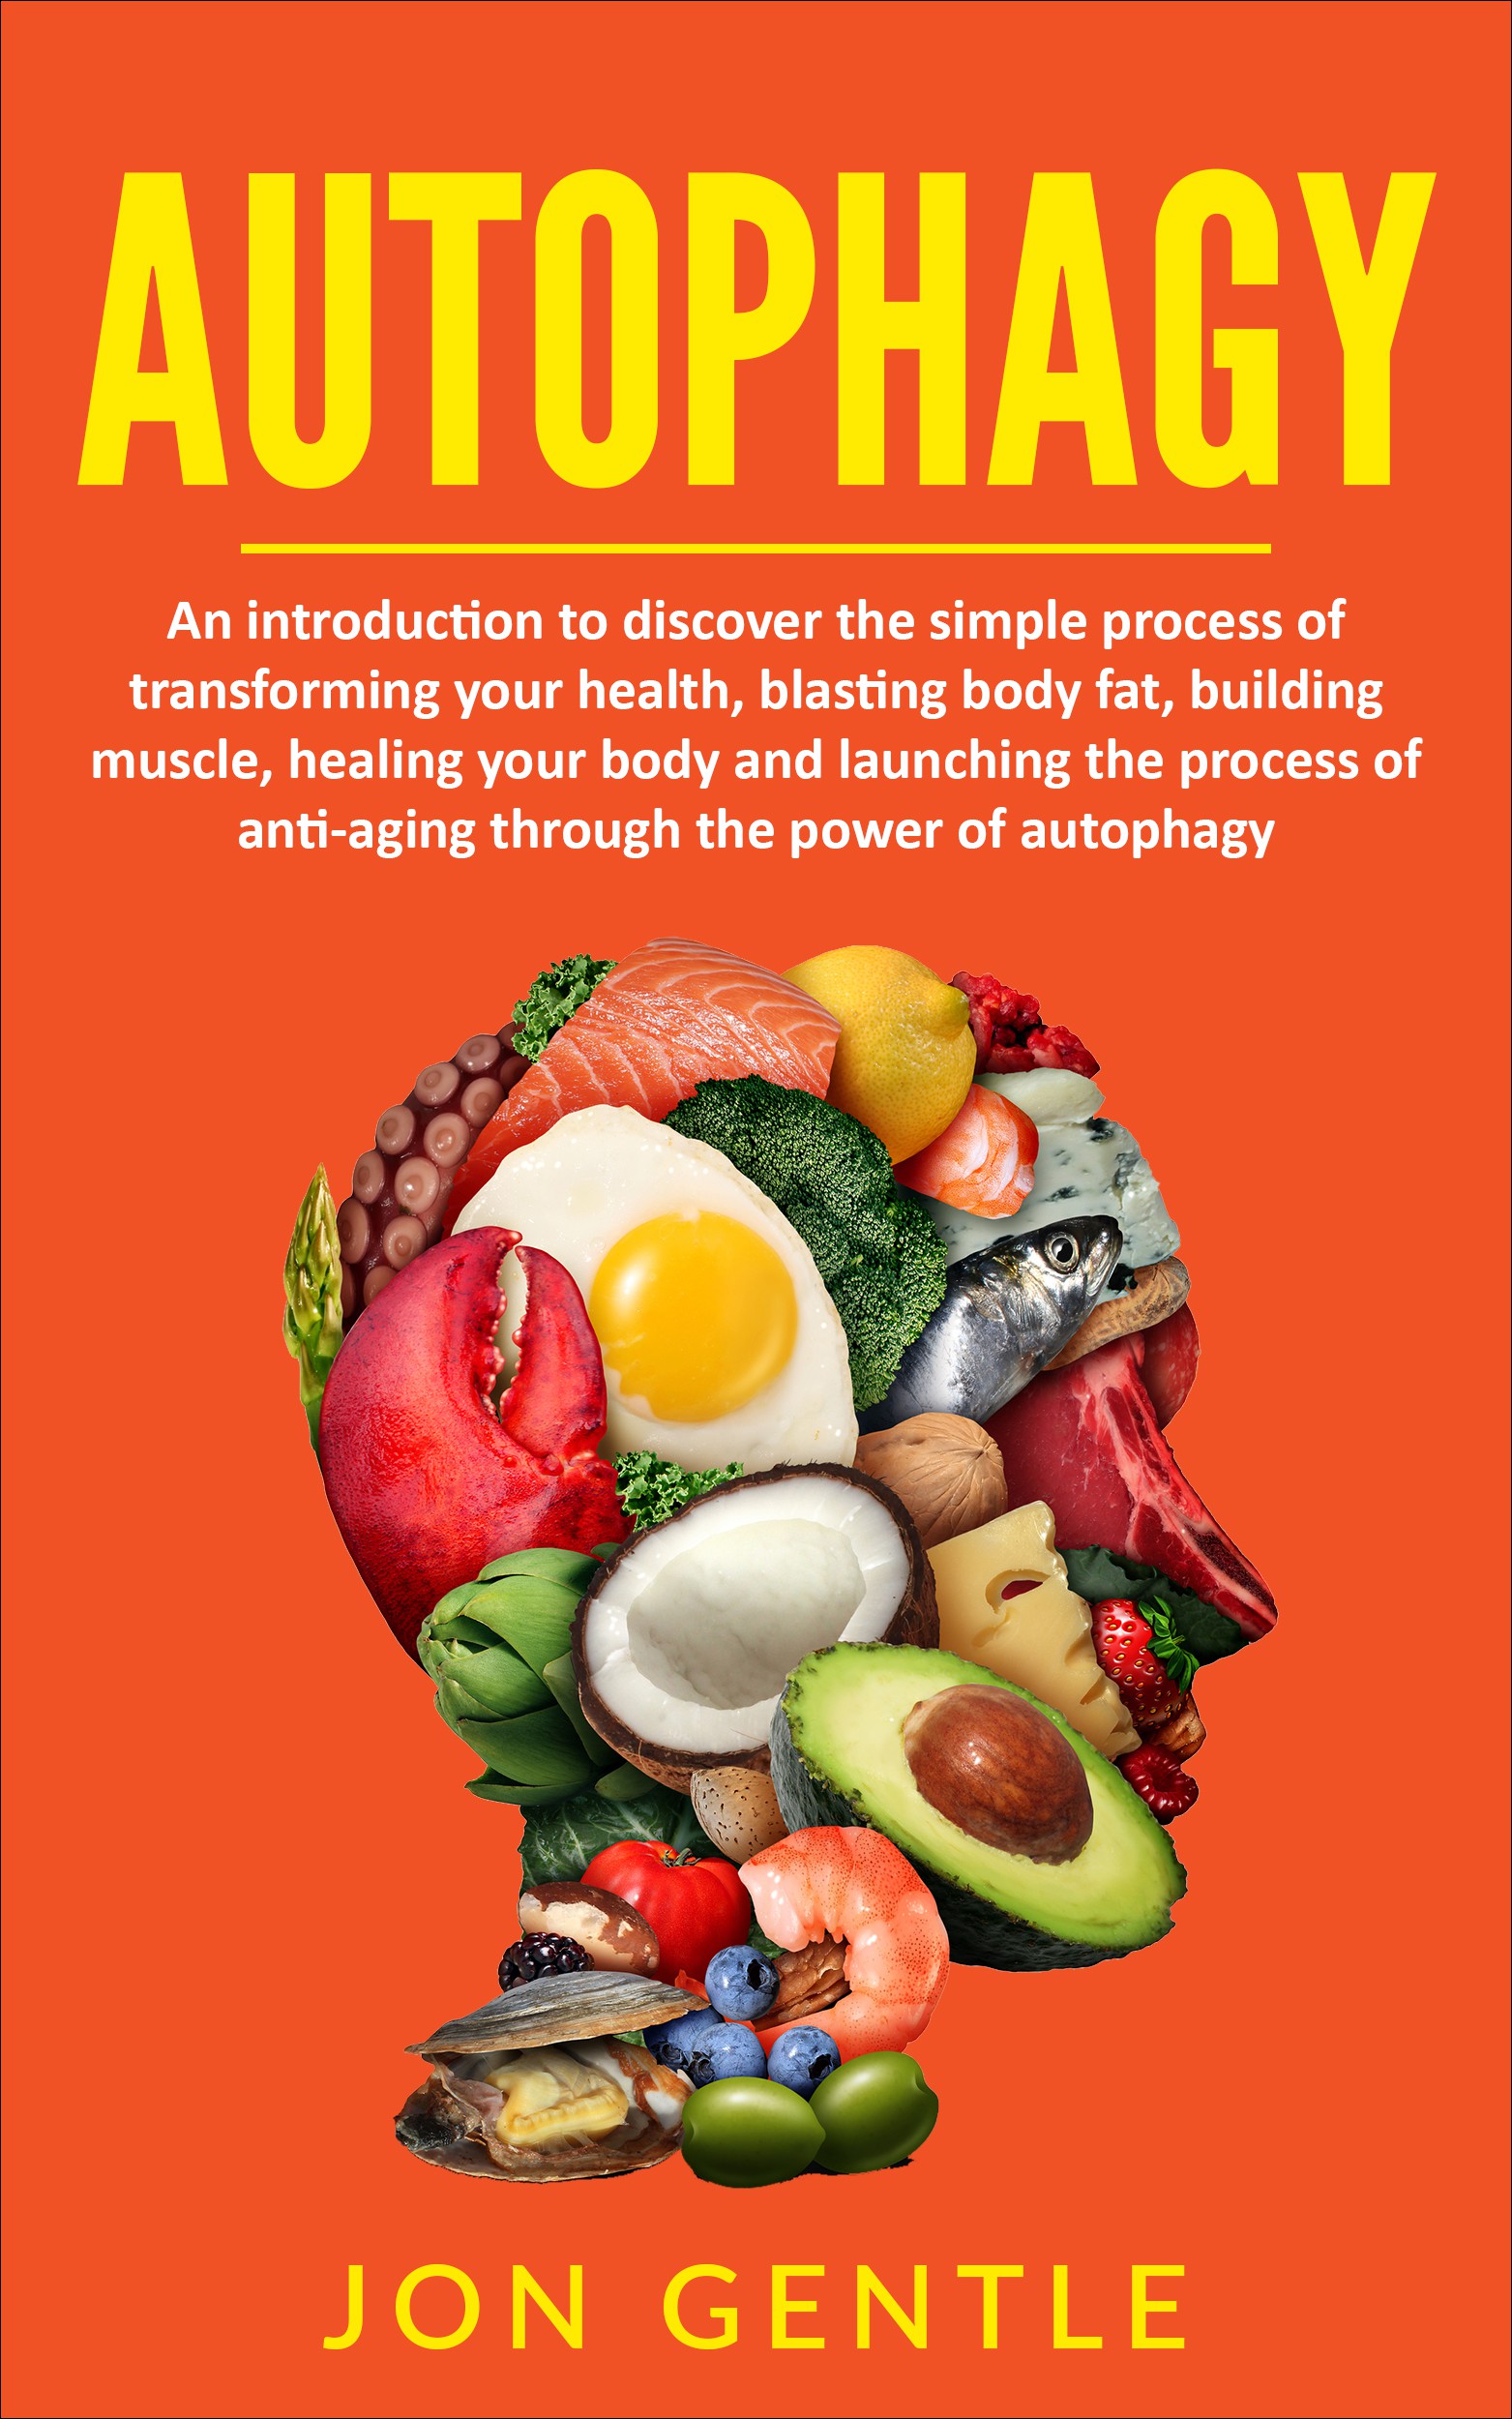 FREE: Autophagy: A Simple Guide of Transforming Your Health, Lose Body Fat, Build Muscle and Begin the Process of Anti-Aging Through The Power of Autophagy and Intermittent Fasting by Jon Gentle